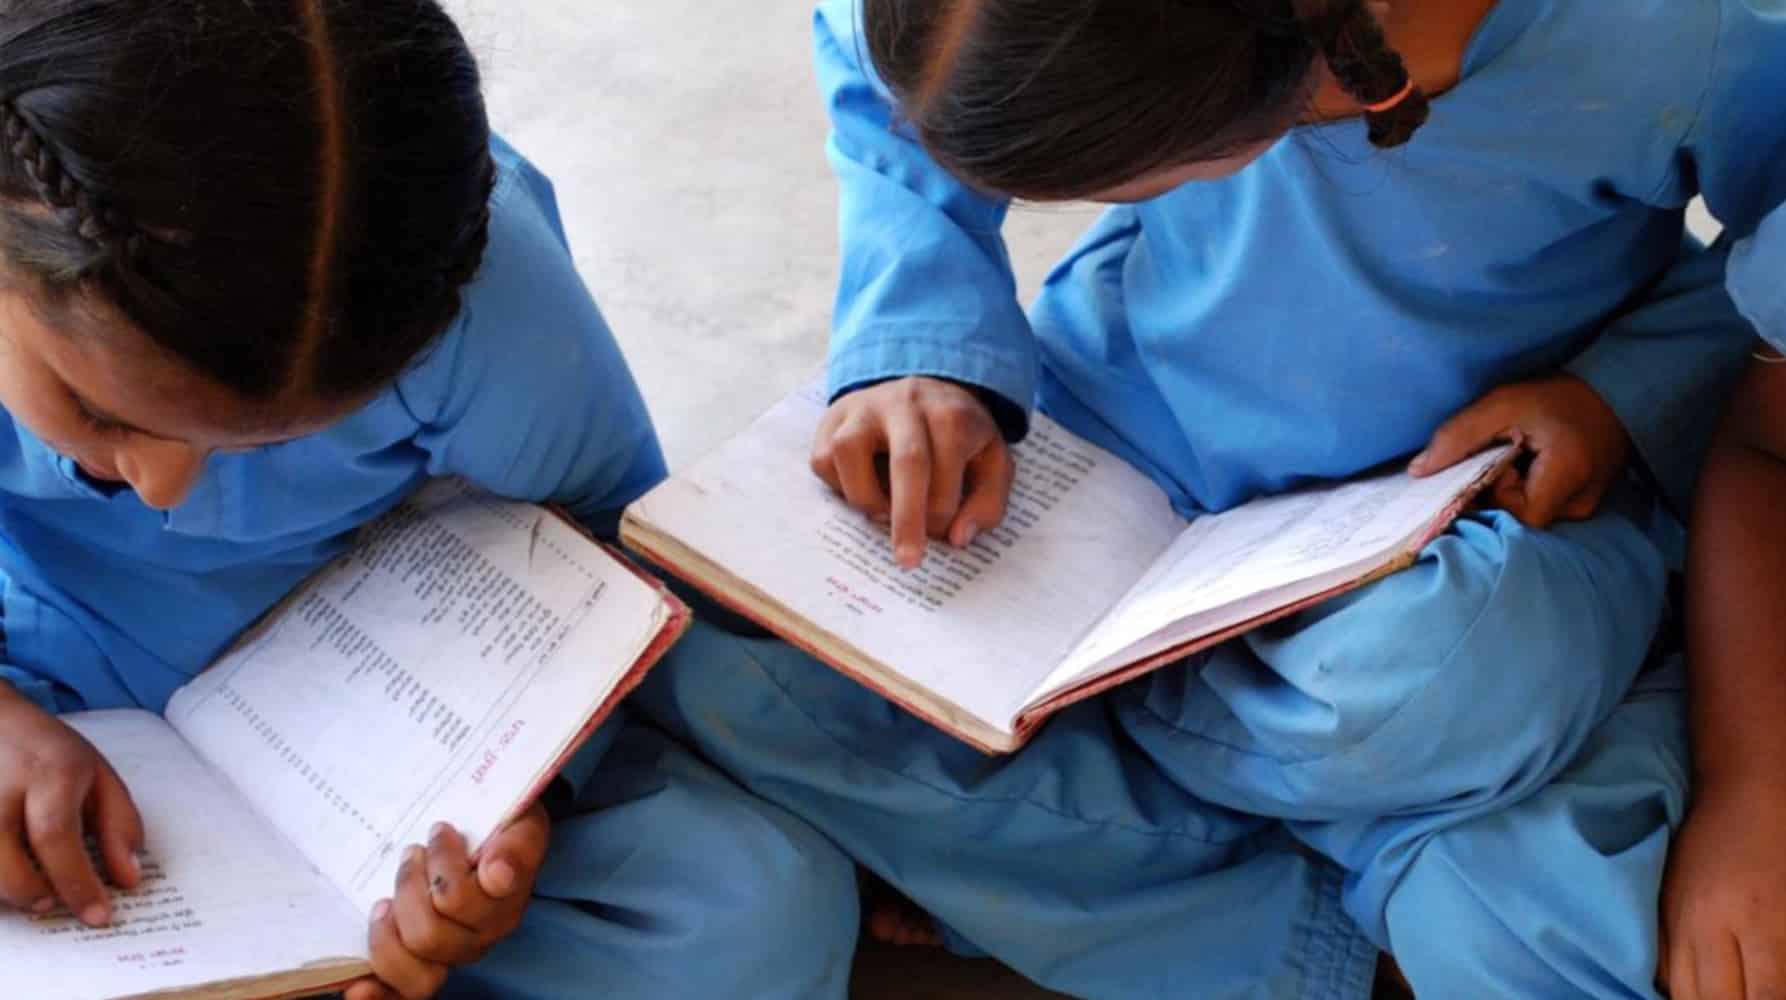 https://finserving.com/wp-content/uploads/2020/07/Education-System-in-India.jpg